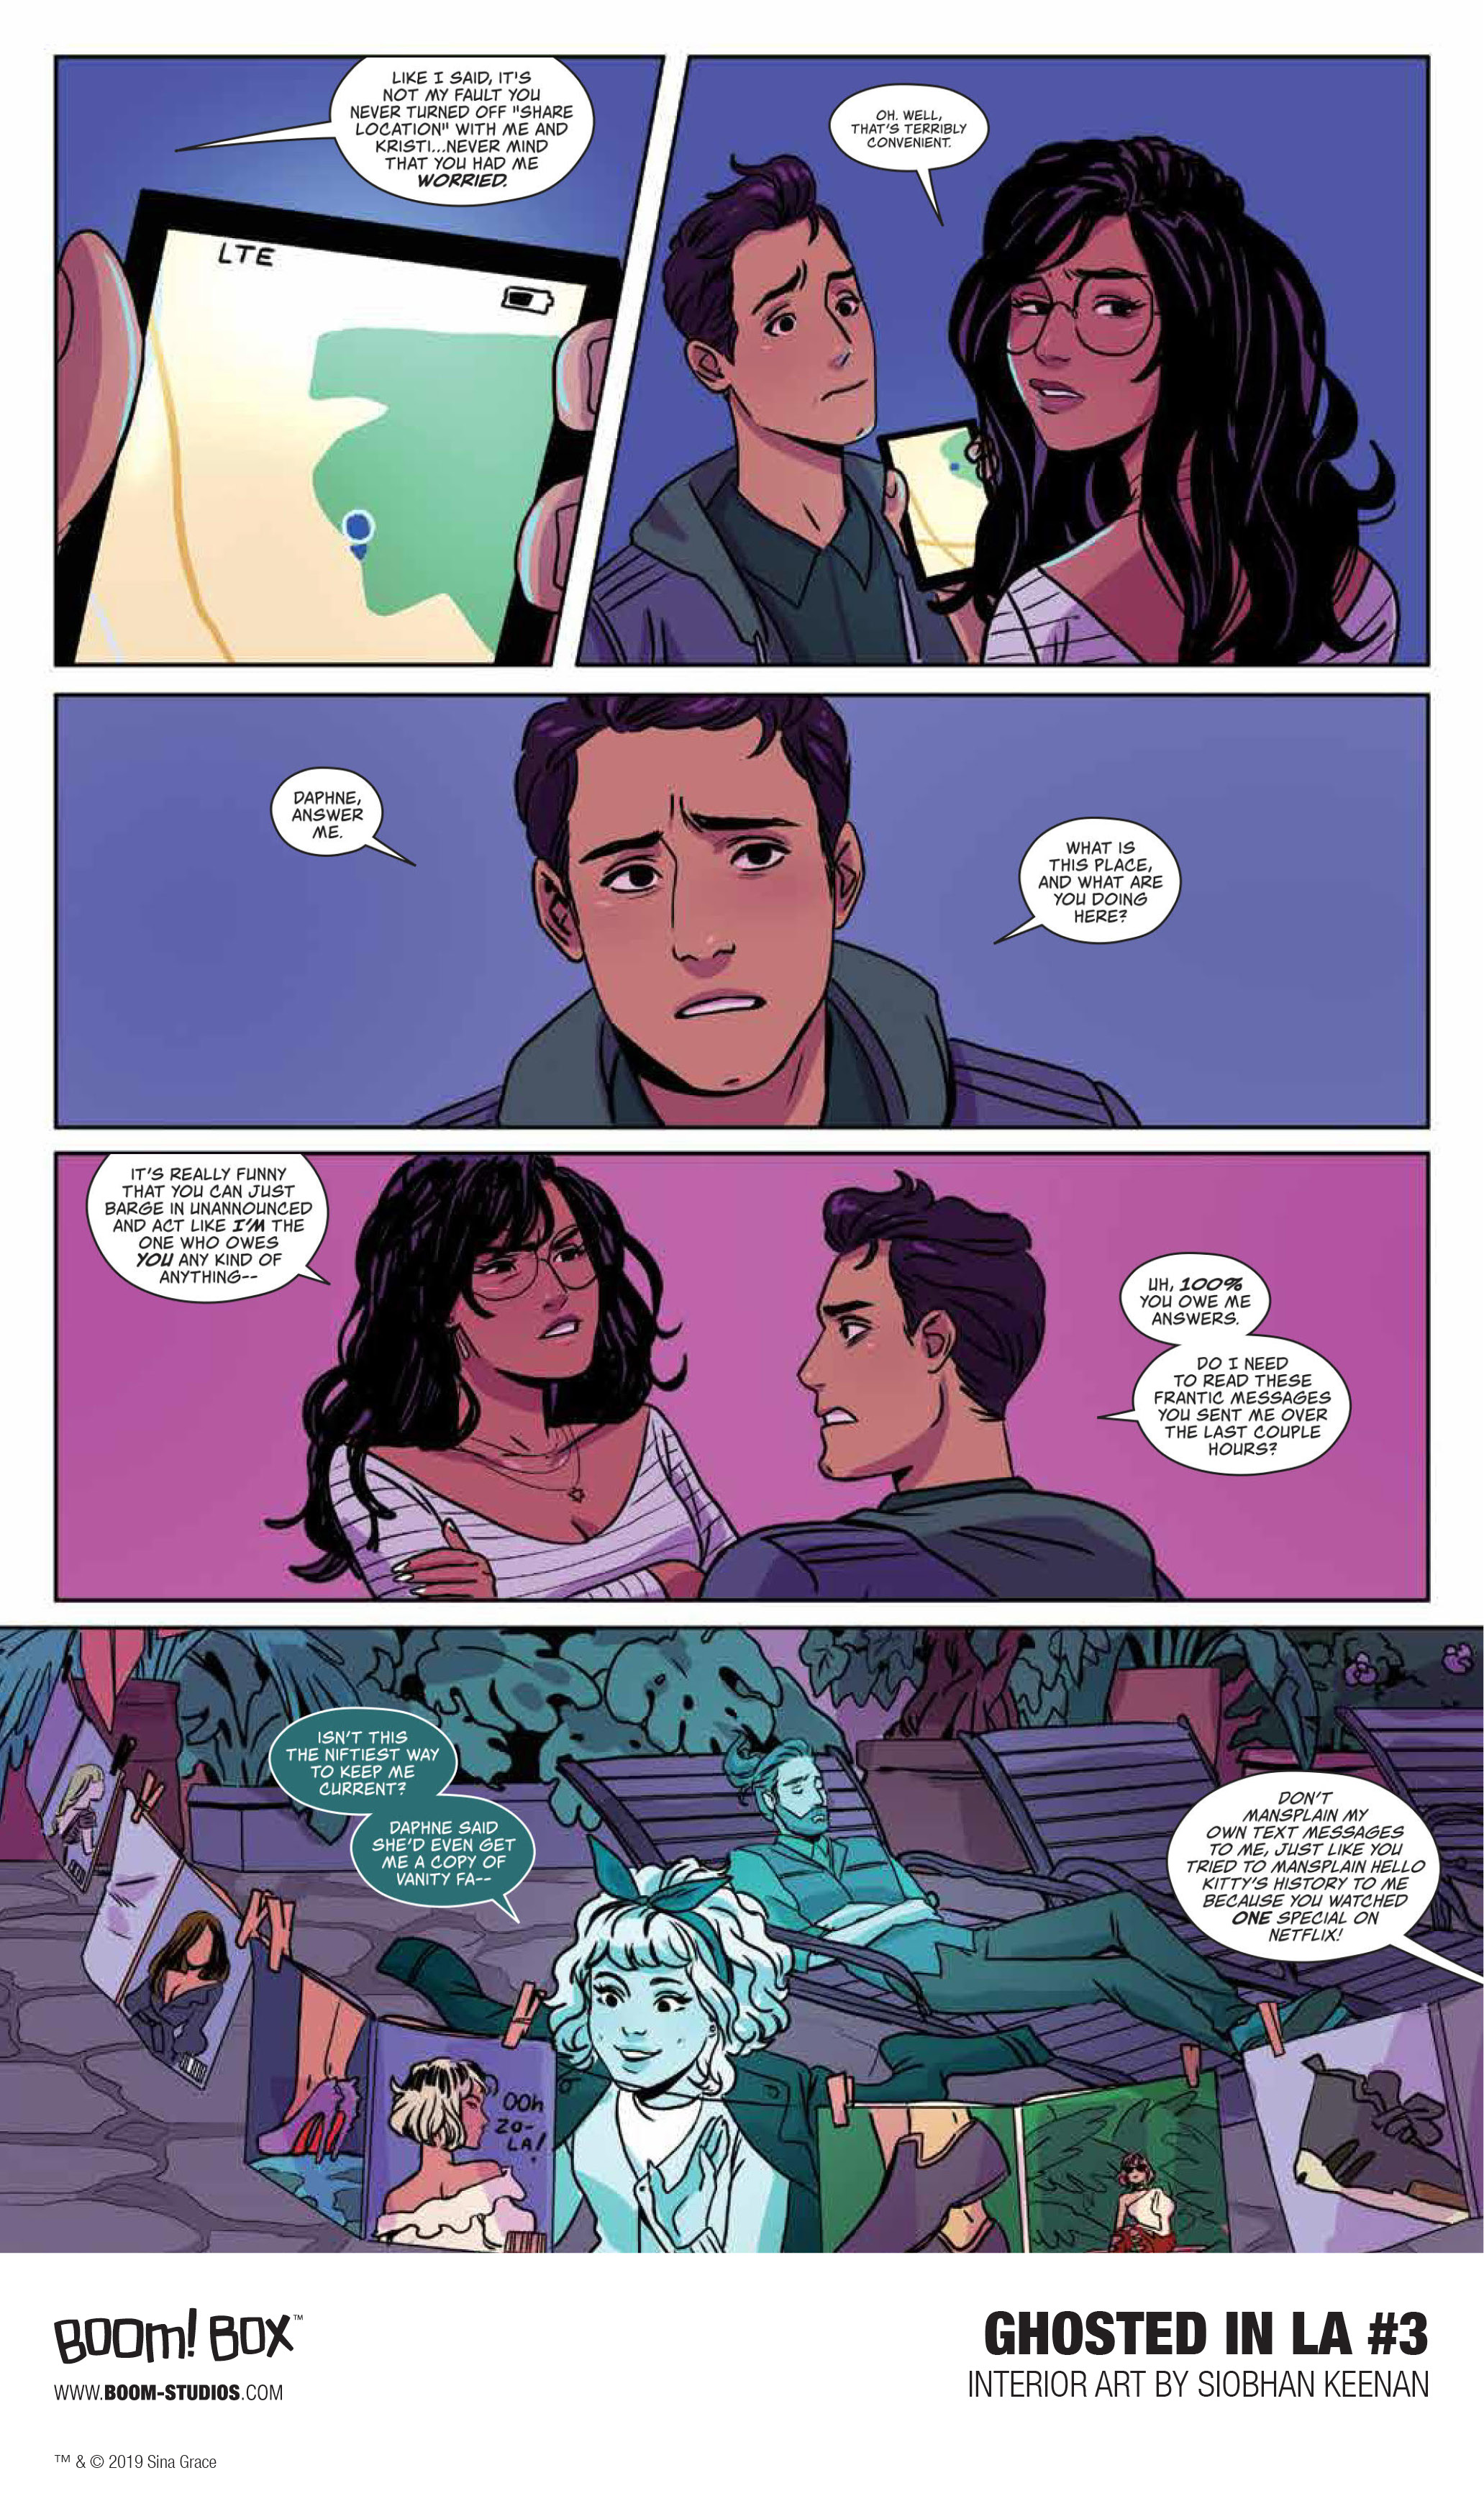 Ghosted in L.A. #3 preview page 2